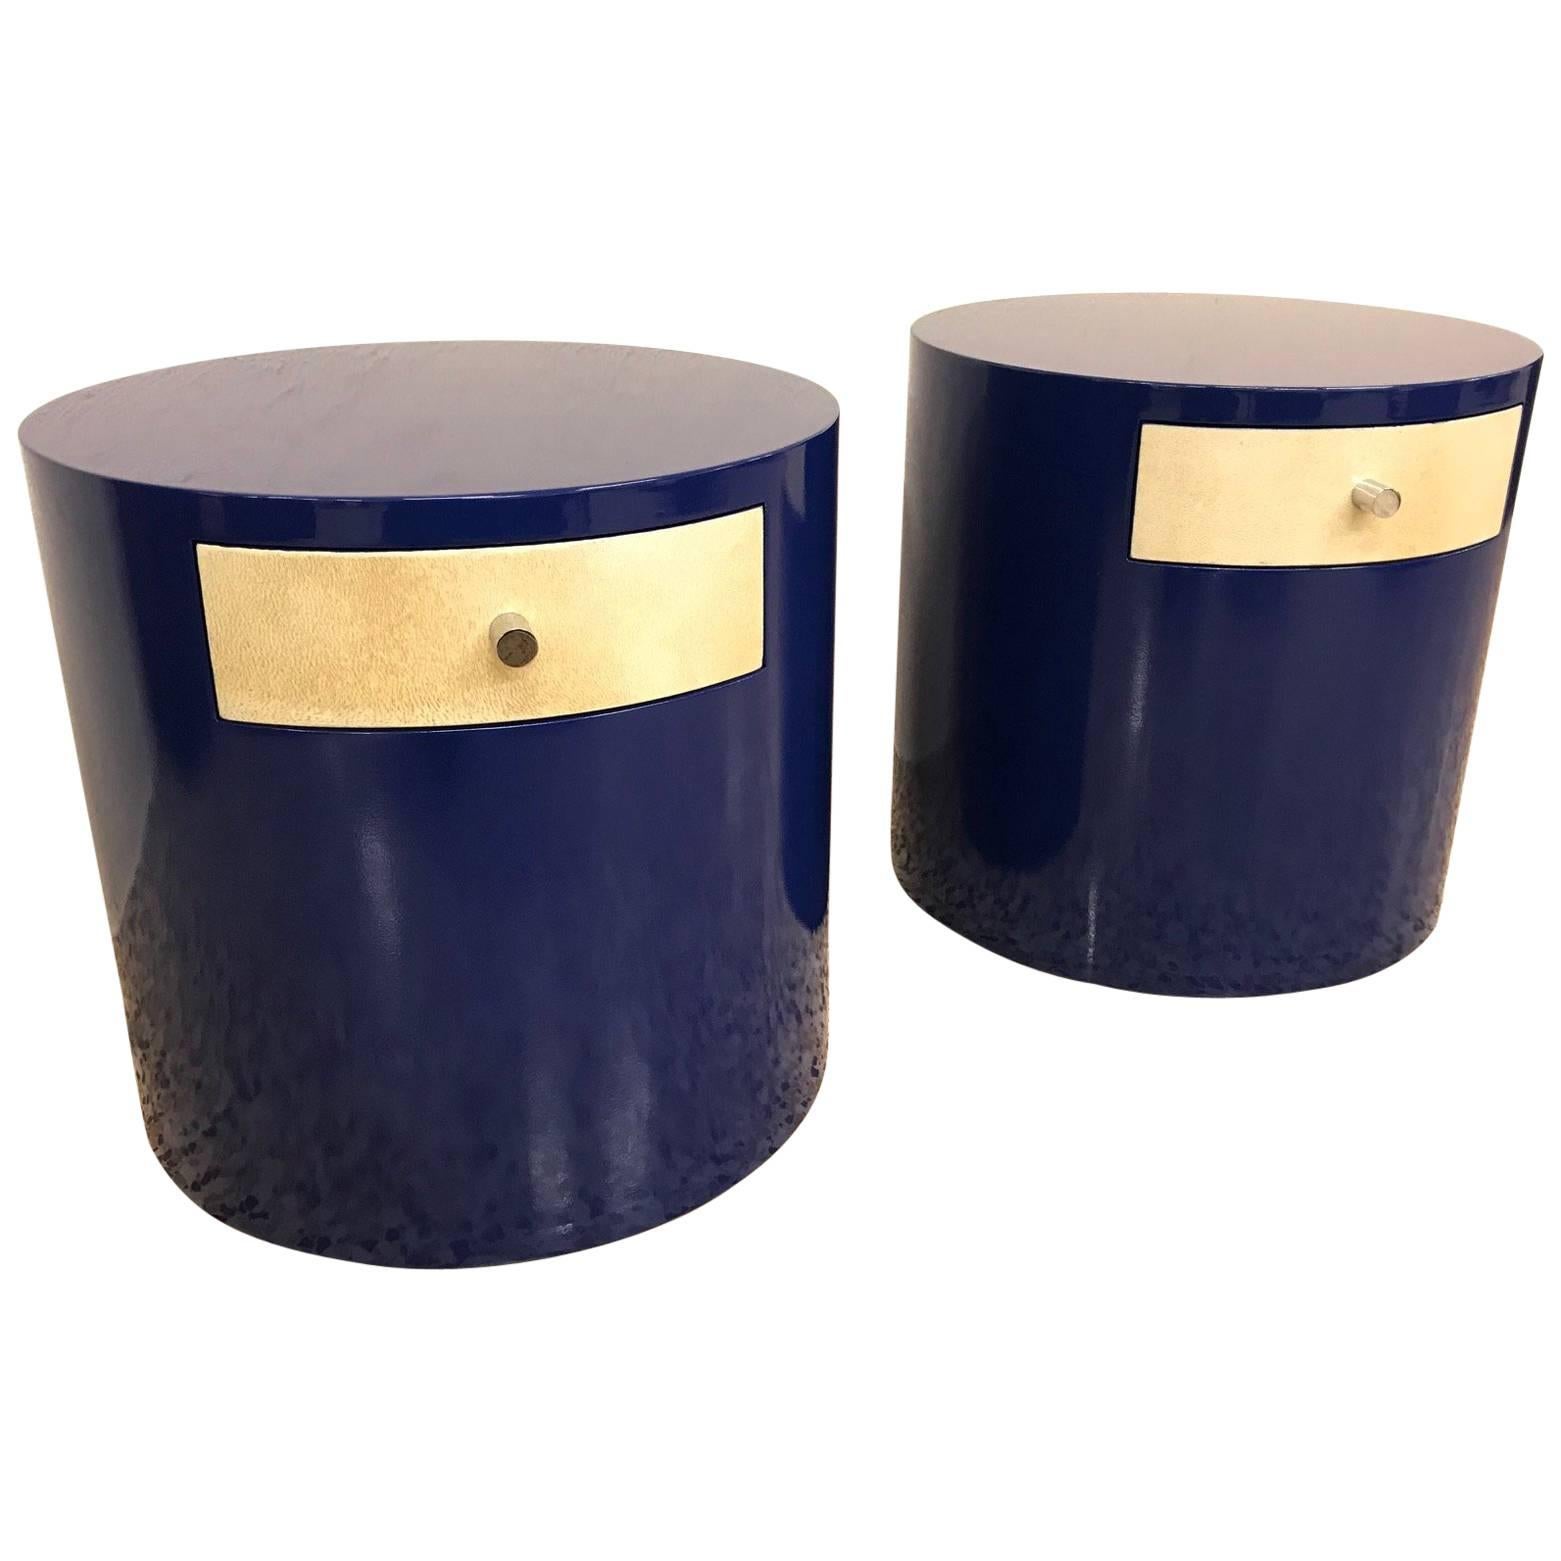 Pair of Mid-Century Modern Blue and Parchment Nightstands, 1970s